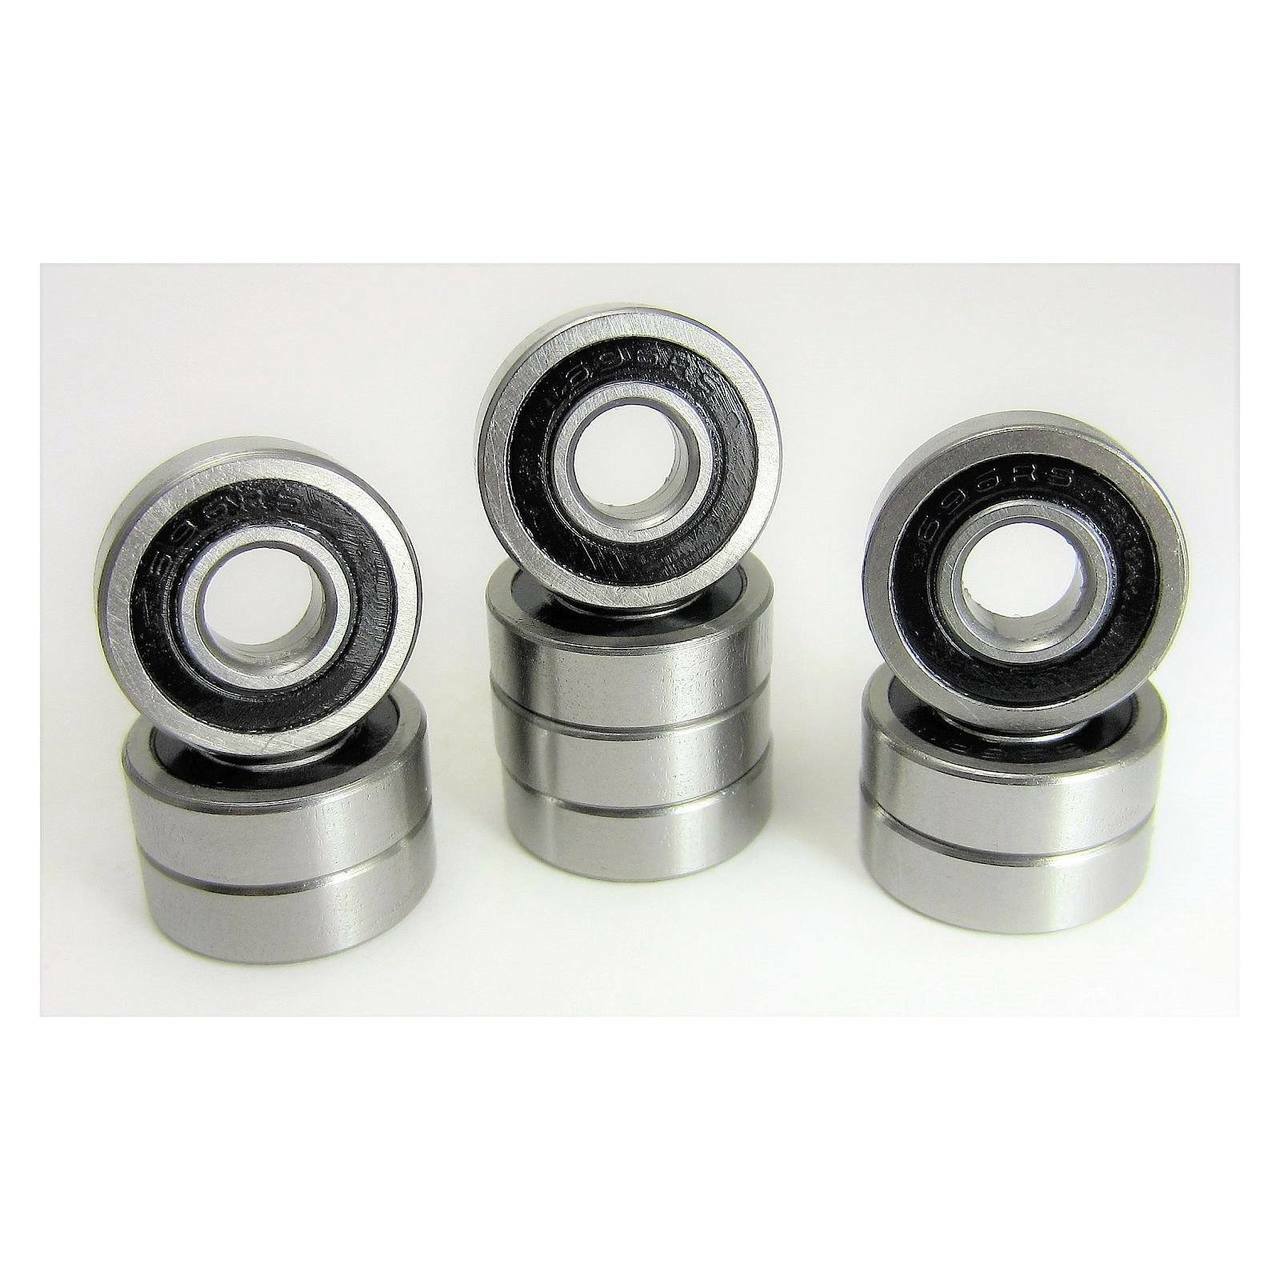 696A-2RS 6x16x5 Precision High Speed RC Car Ball Bearing, Chrome Steel (GCr15) with Black Rubber Seals ABEC-1 ABEC-3 ABEC-5